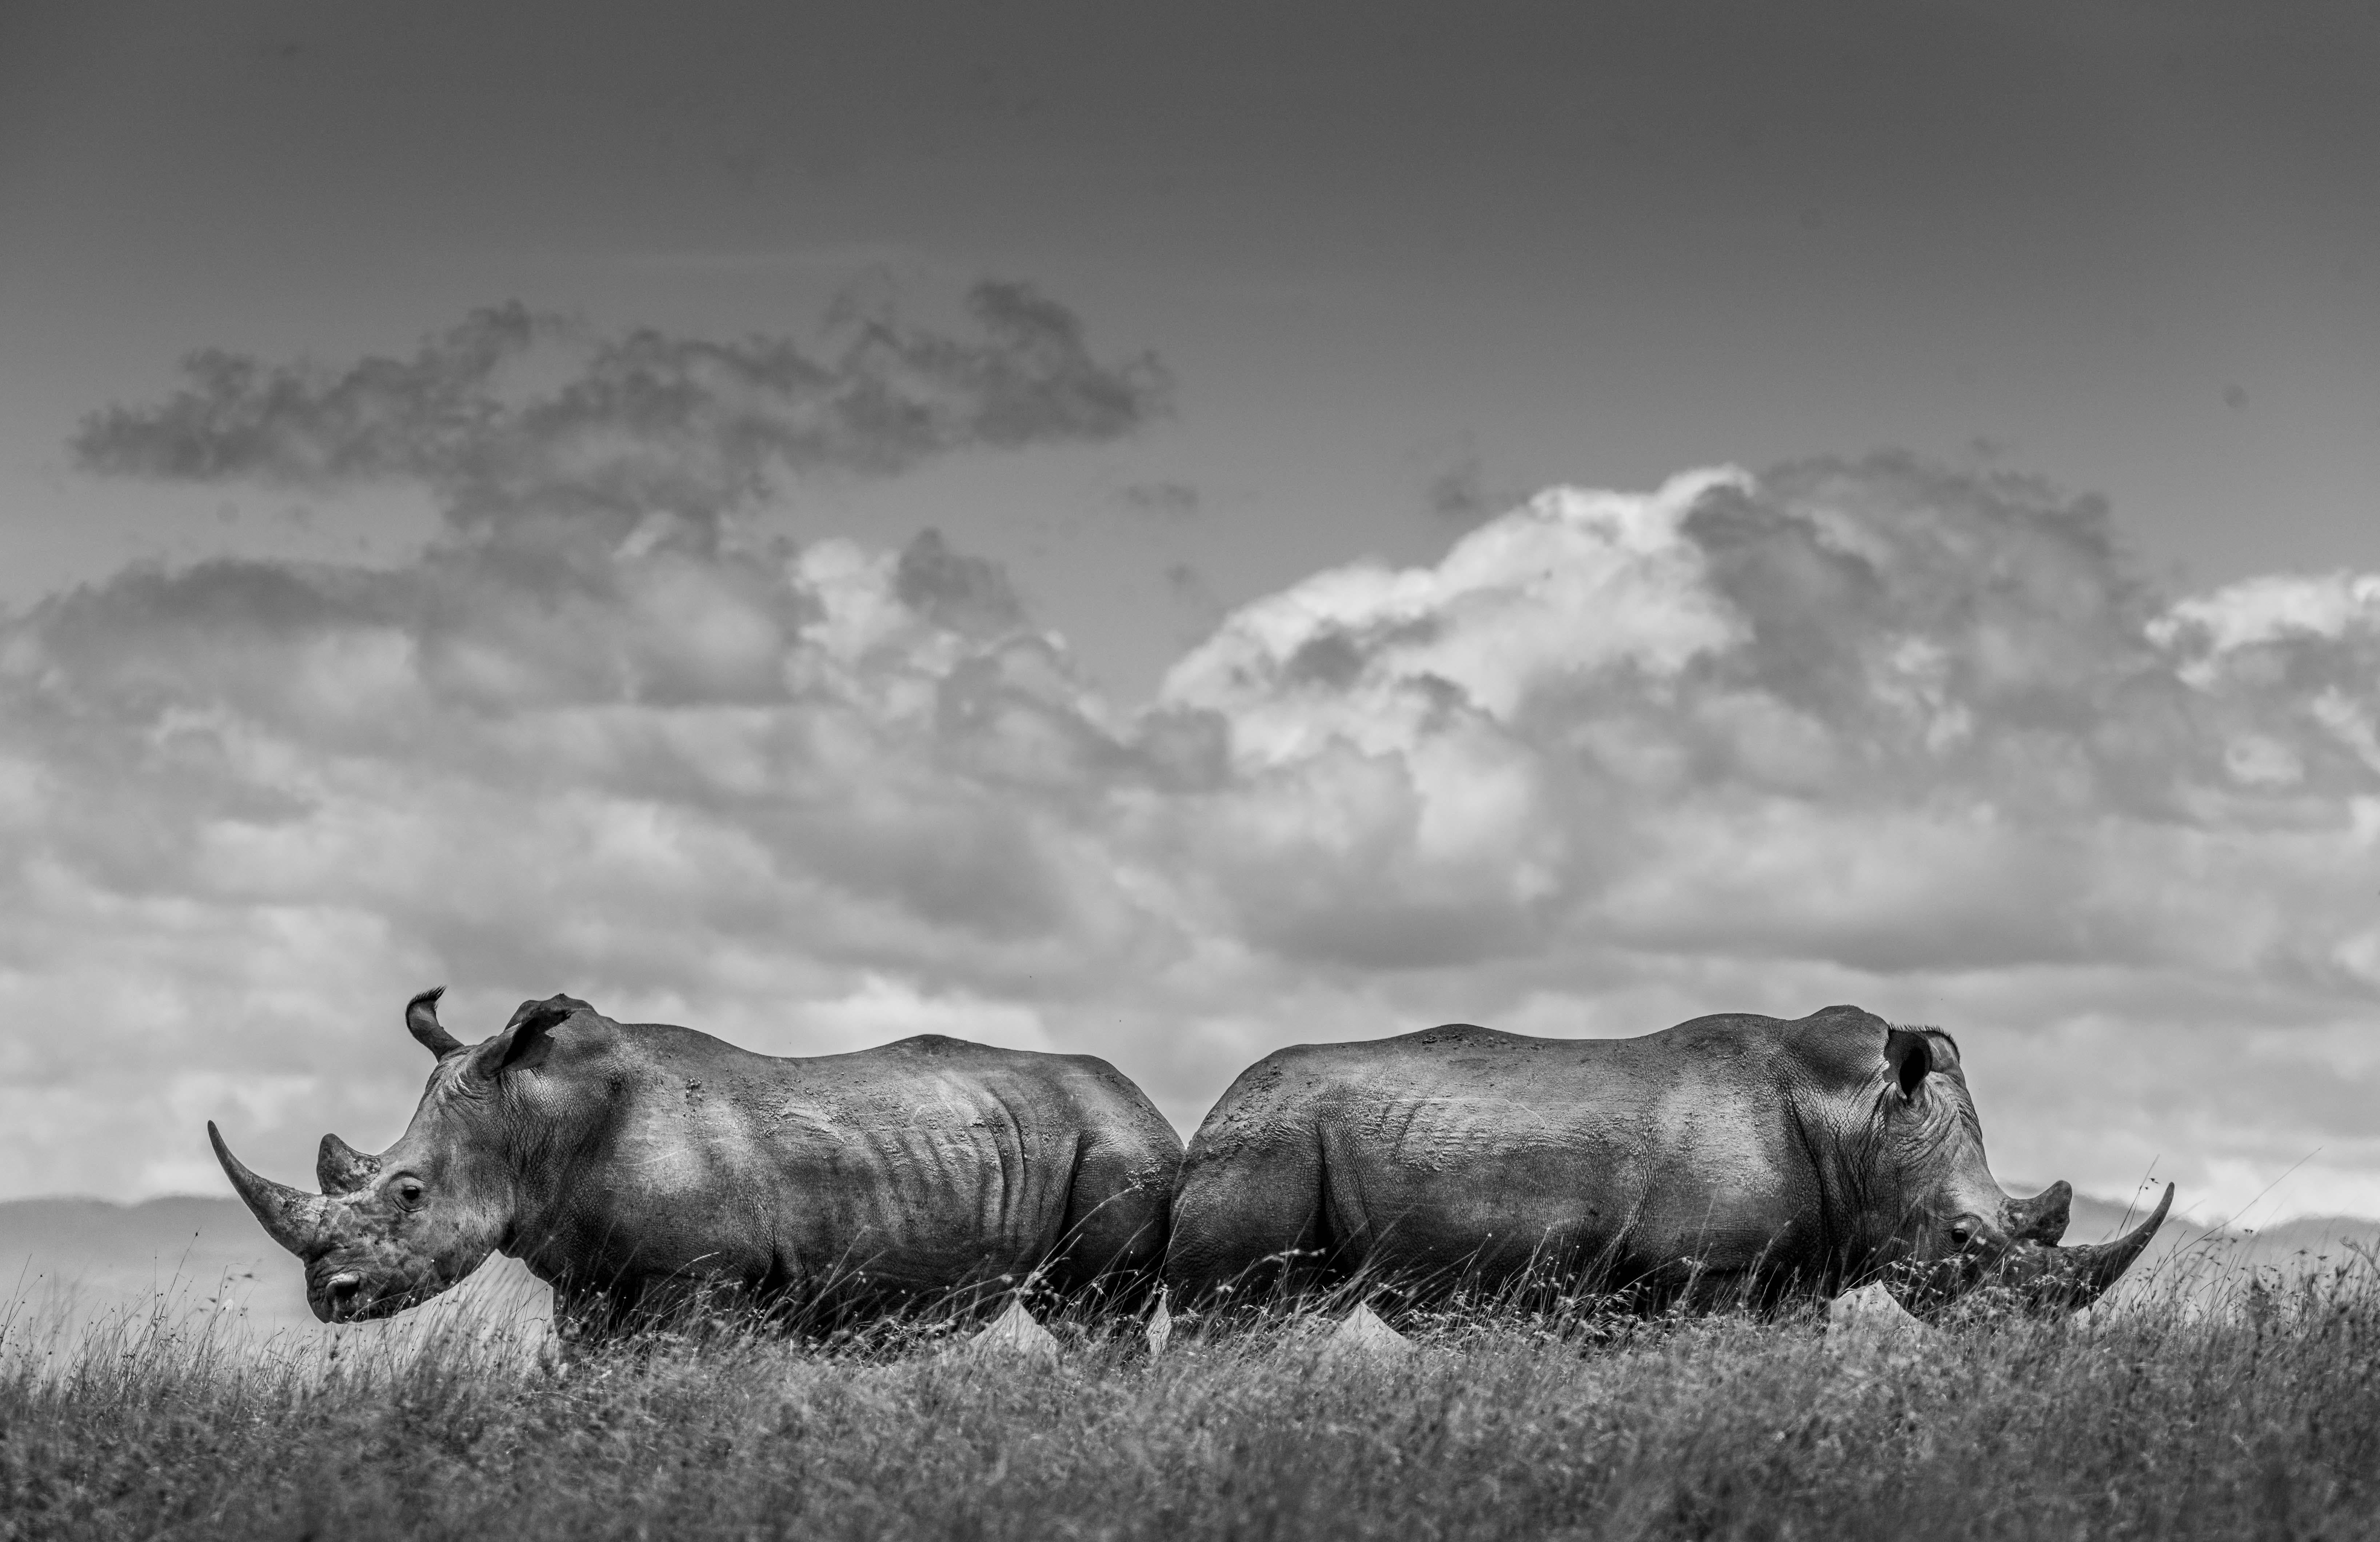 "I have been predominately unsatisfied with my Rhino photographs of the past, as I have struggled to achieve clean backgrounds with lots of sky which I find so important in my approach. This often makes White Rhino superior subjects as they are